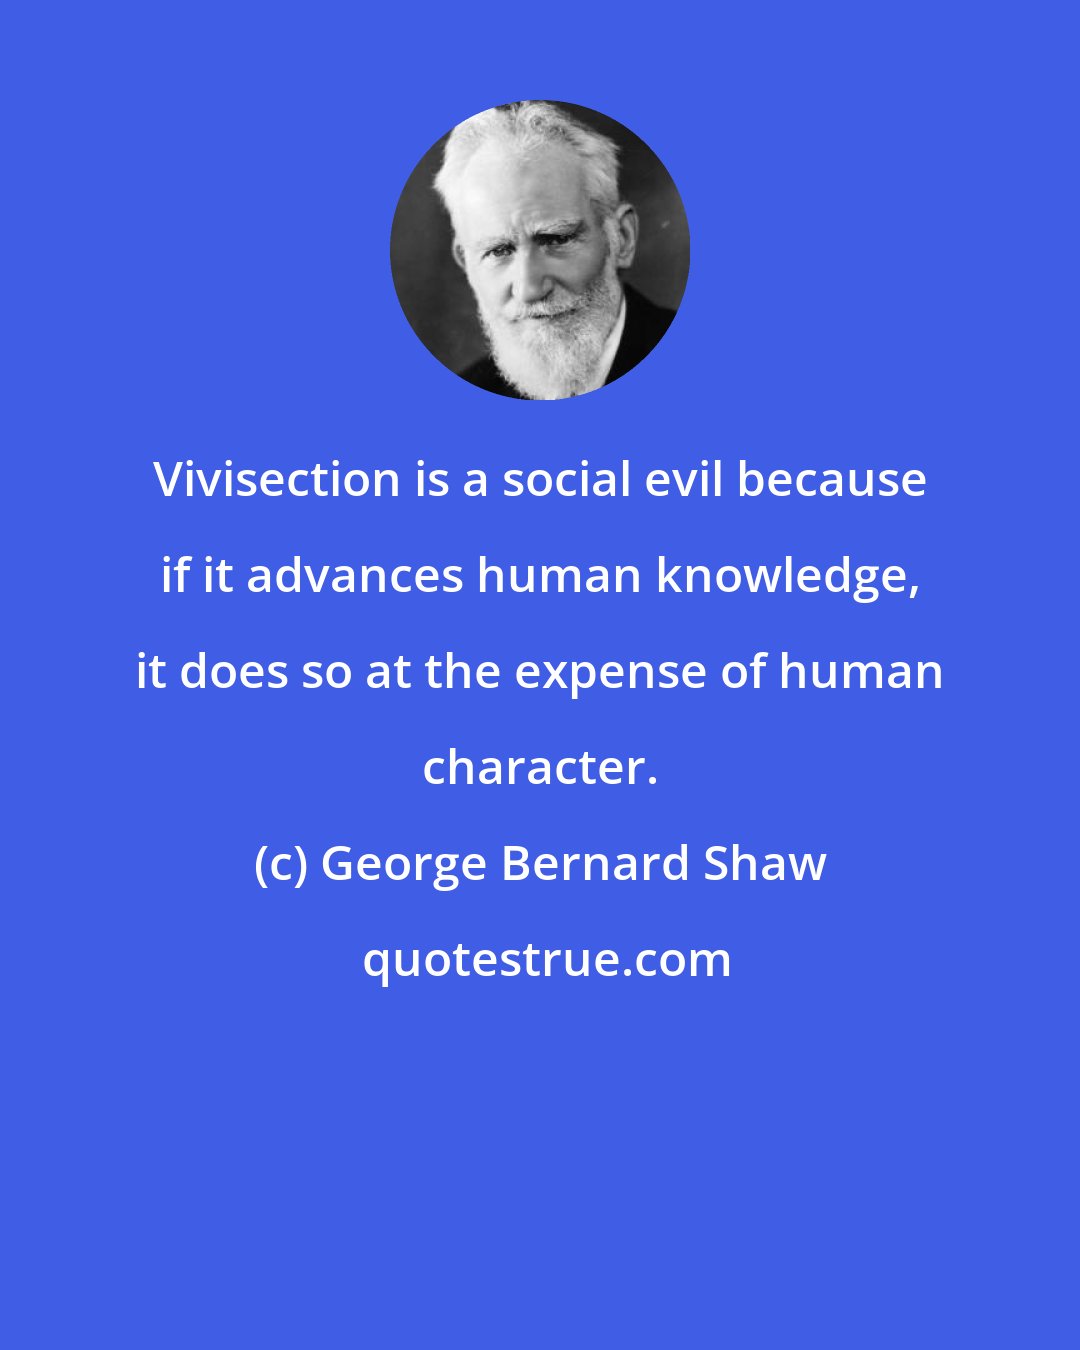 George Bernard Shaw: Vivisection is a social evil because if it advances human knowledge, it does so at the expense of human character.